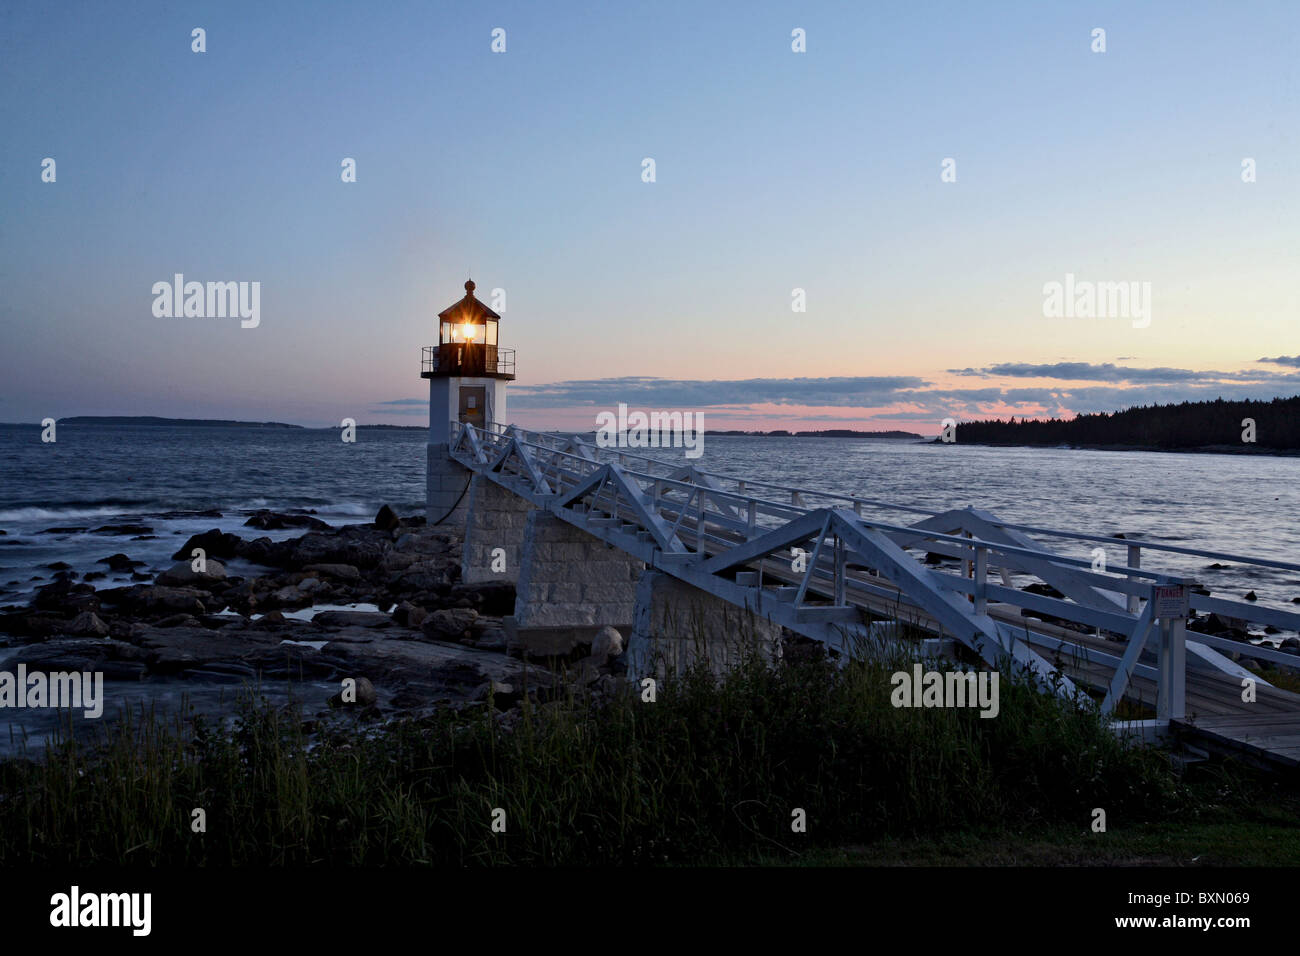 Port Clyde's Marshall Point Lighthouse is one of many that dot the coastline of Maine, USA Stock Photo